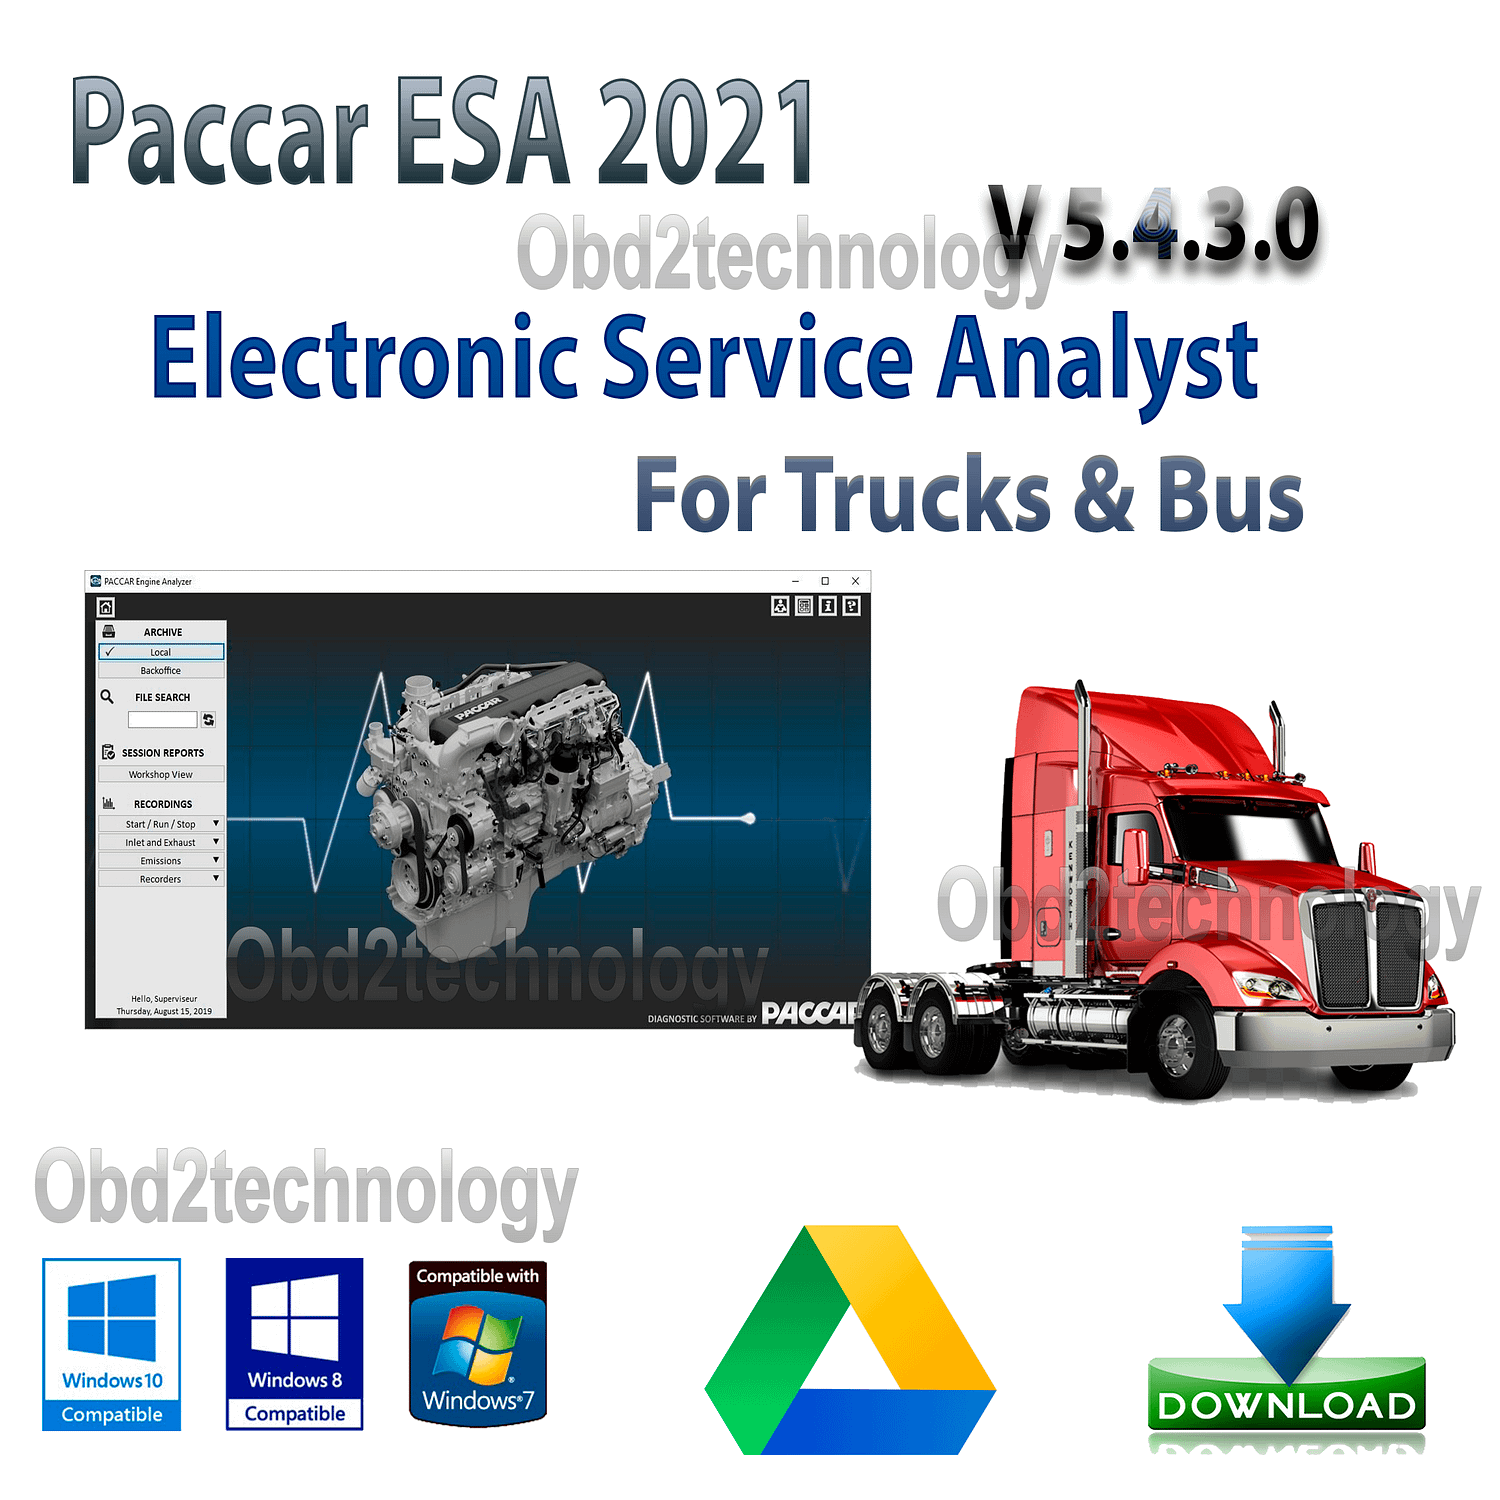 paccar electronic service analyst esa 2021 5.4.3.0 + sw files 02/18/2021 instant download